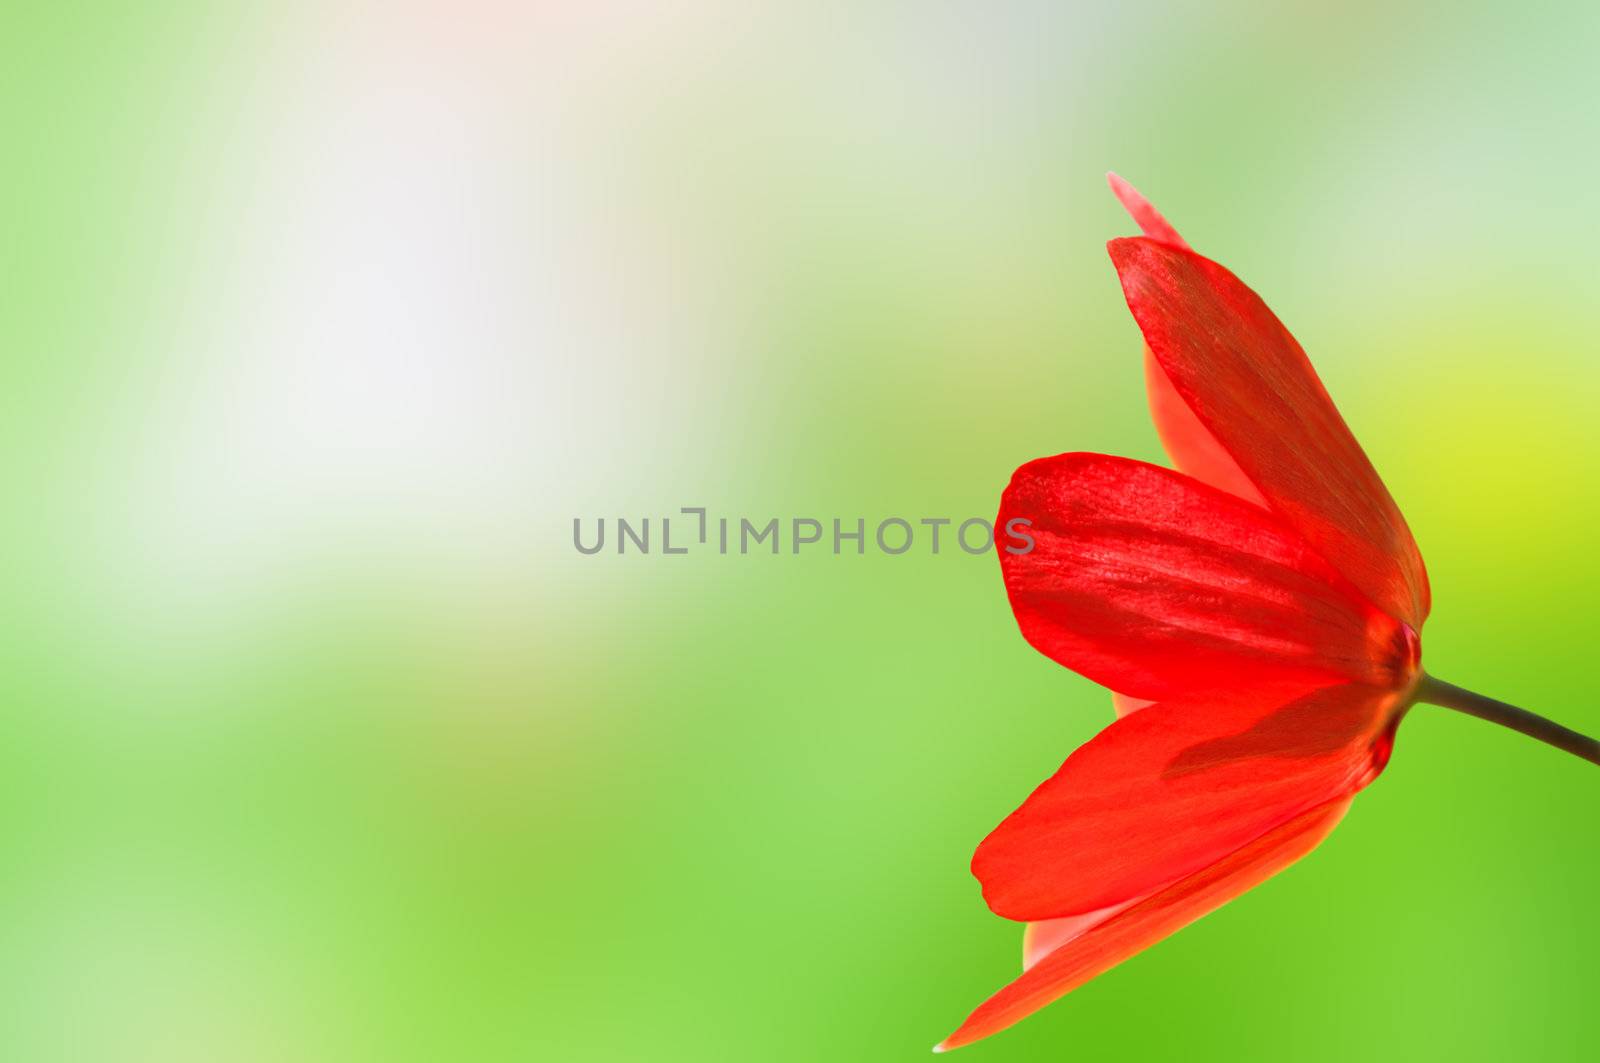 Close up side view of a bright red tulip reaching in from right of frame, against a bokeh background created from the spring flowers and grass that were behind the tulip when it was shot.